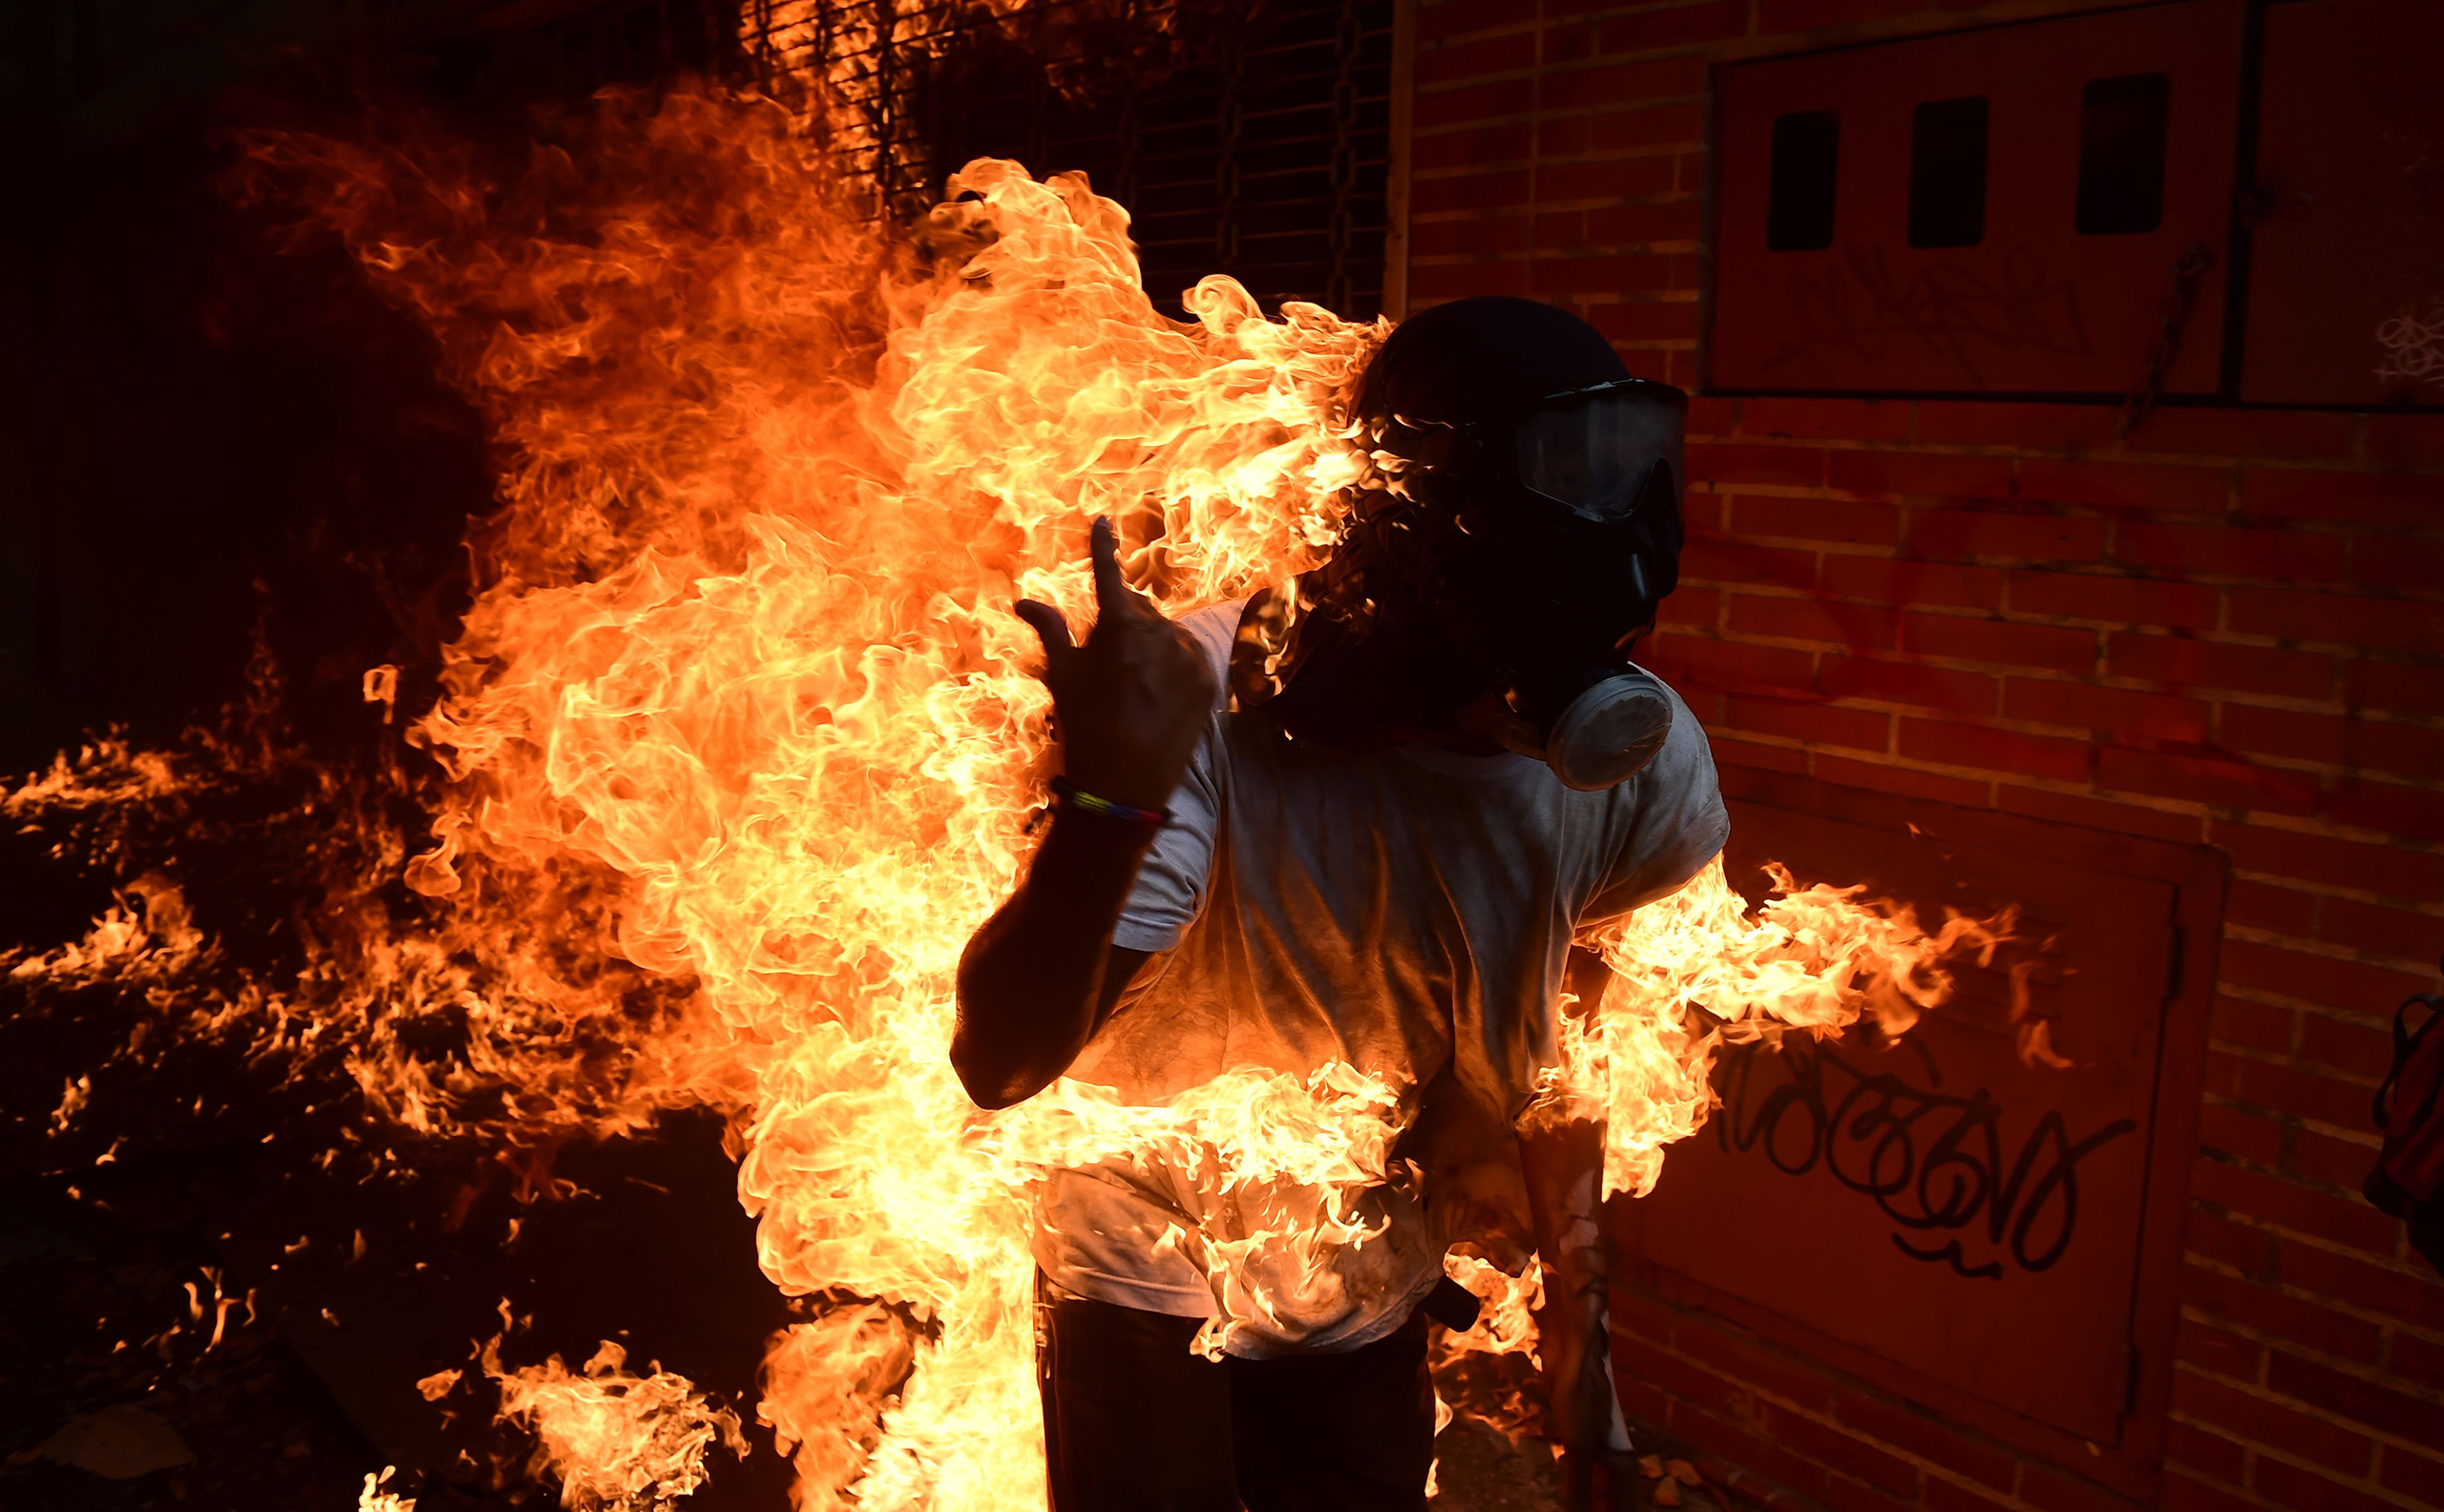 A man set ablaze runs during an anti-Maduro protest in Caracas on May 3, 2017.